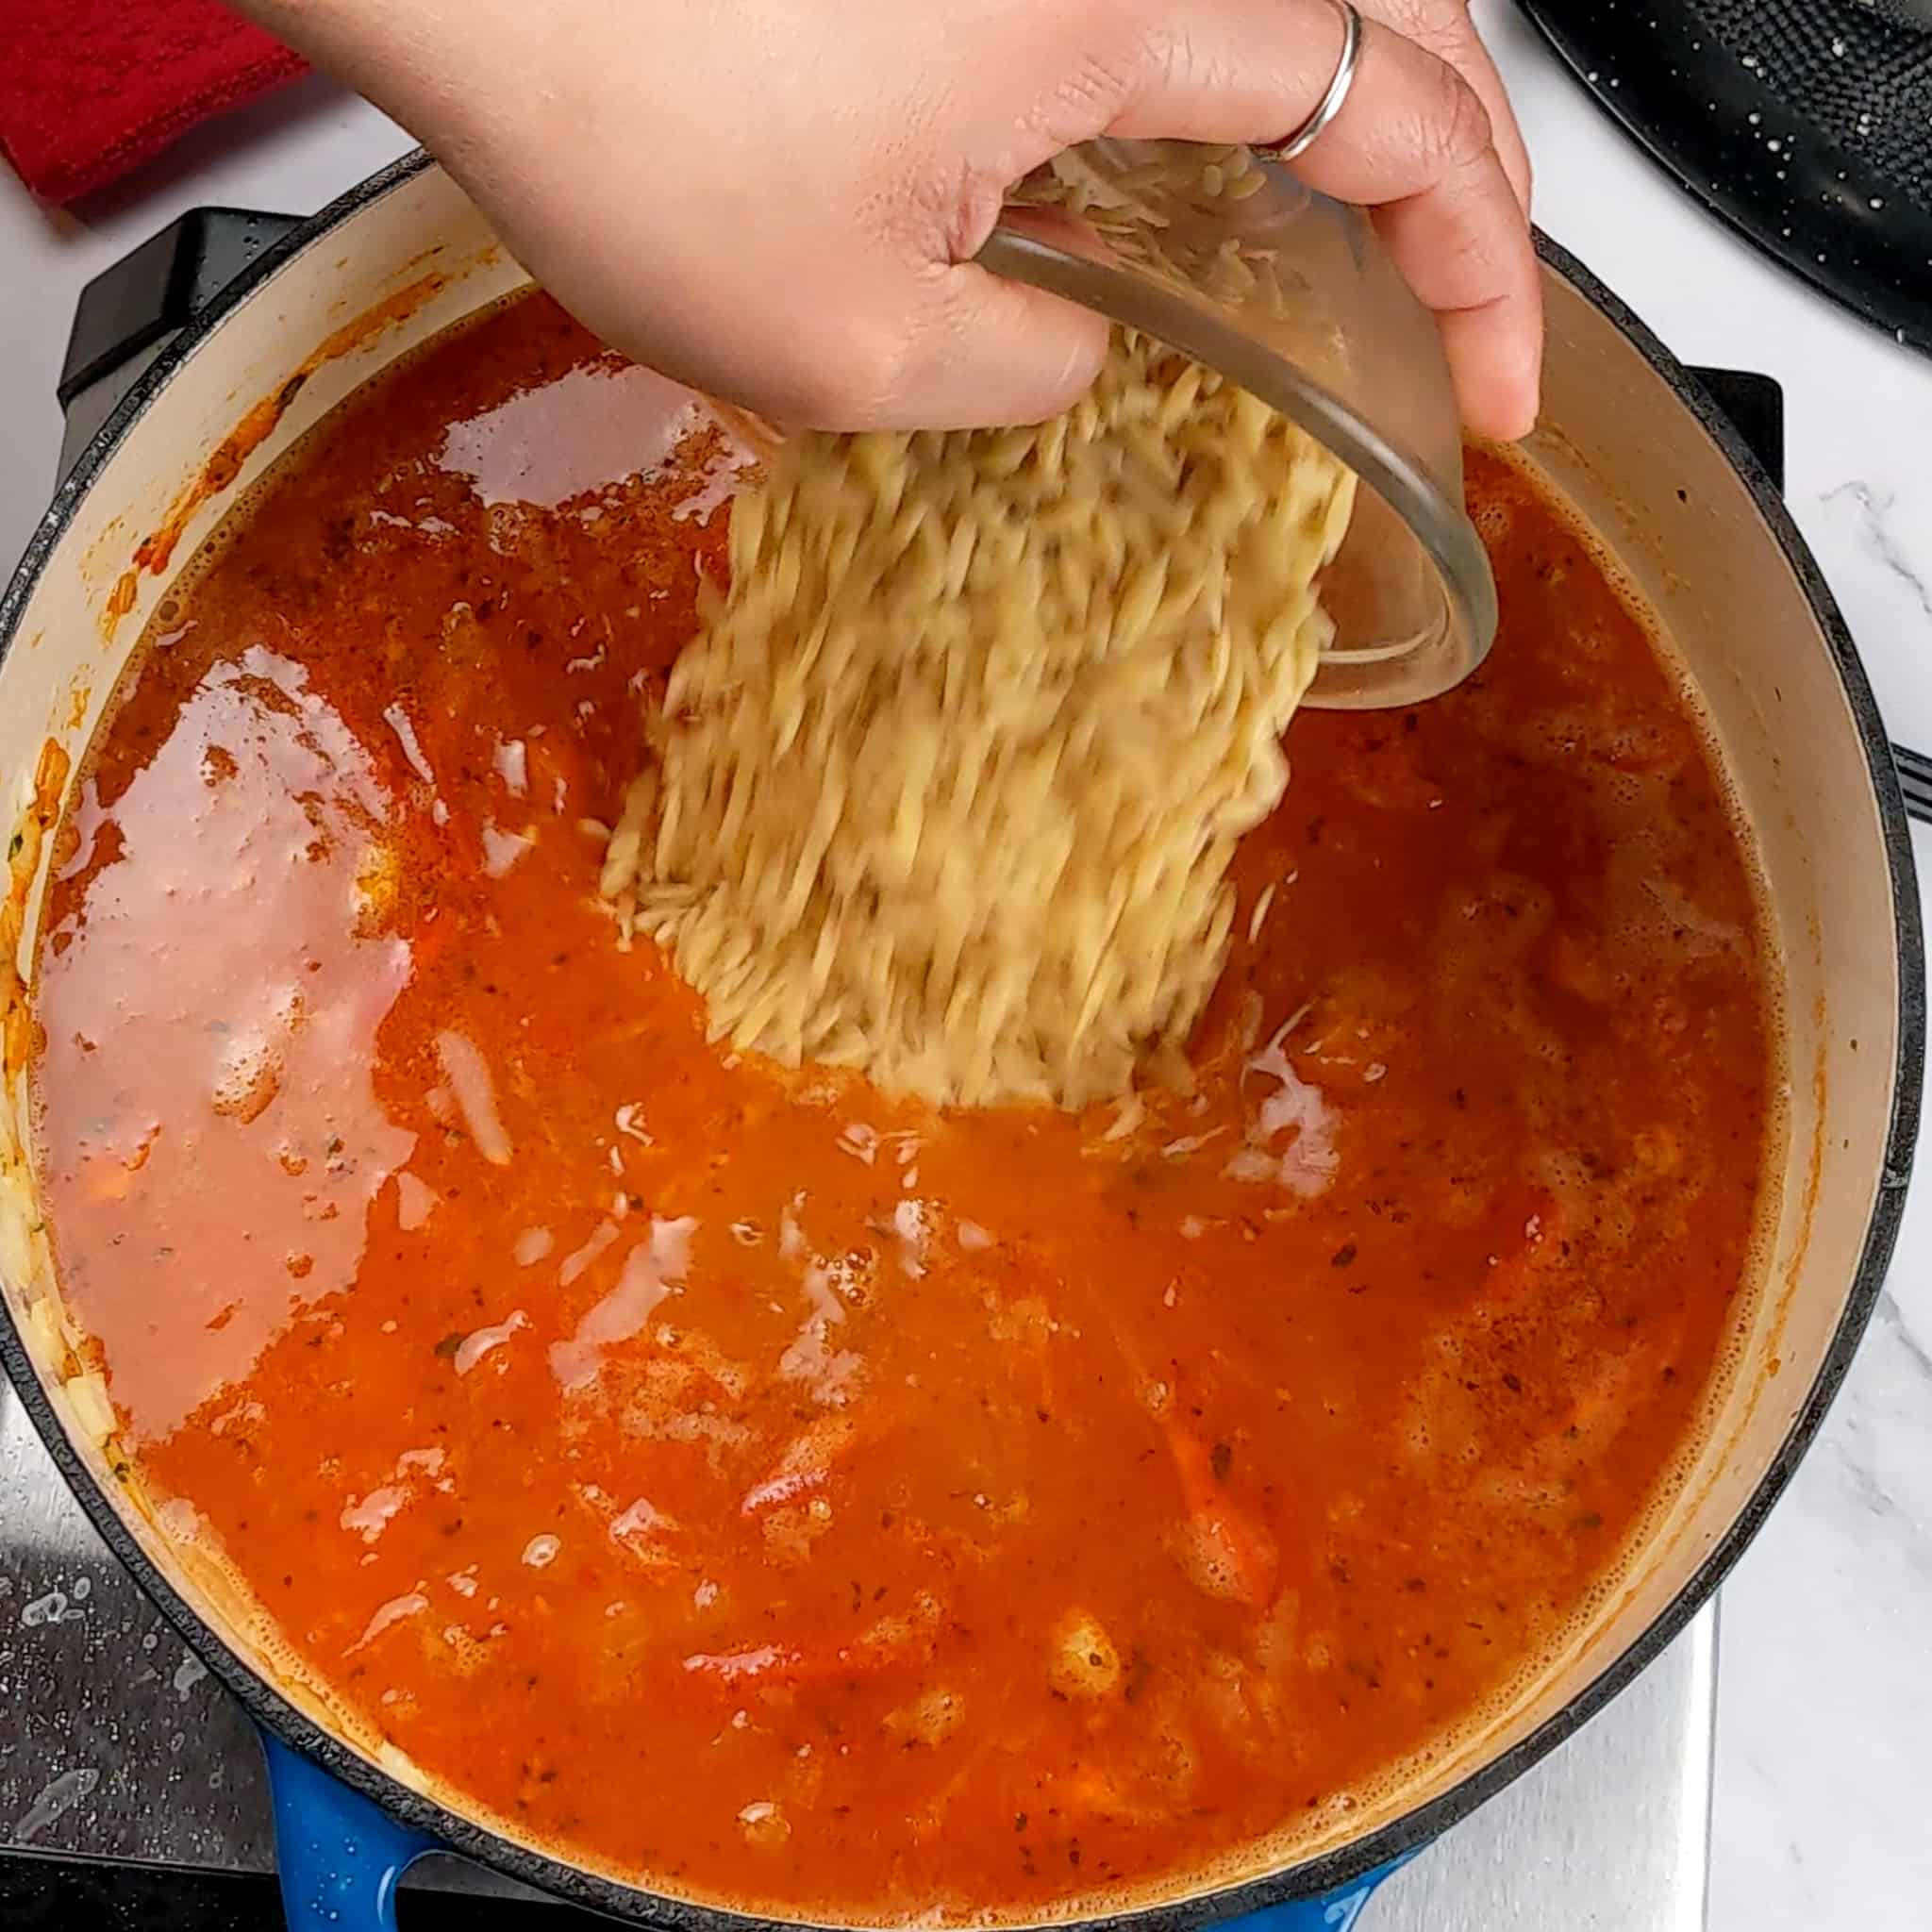 dry orzo pasta being poured into a tomato base broth